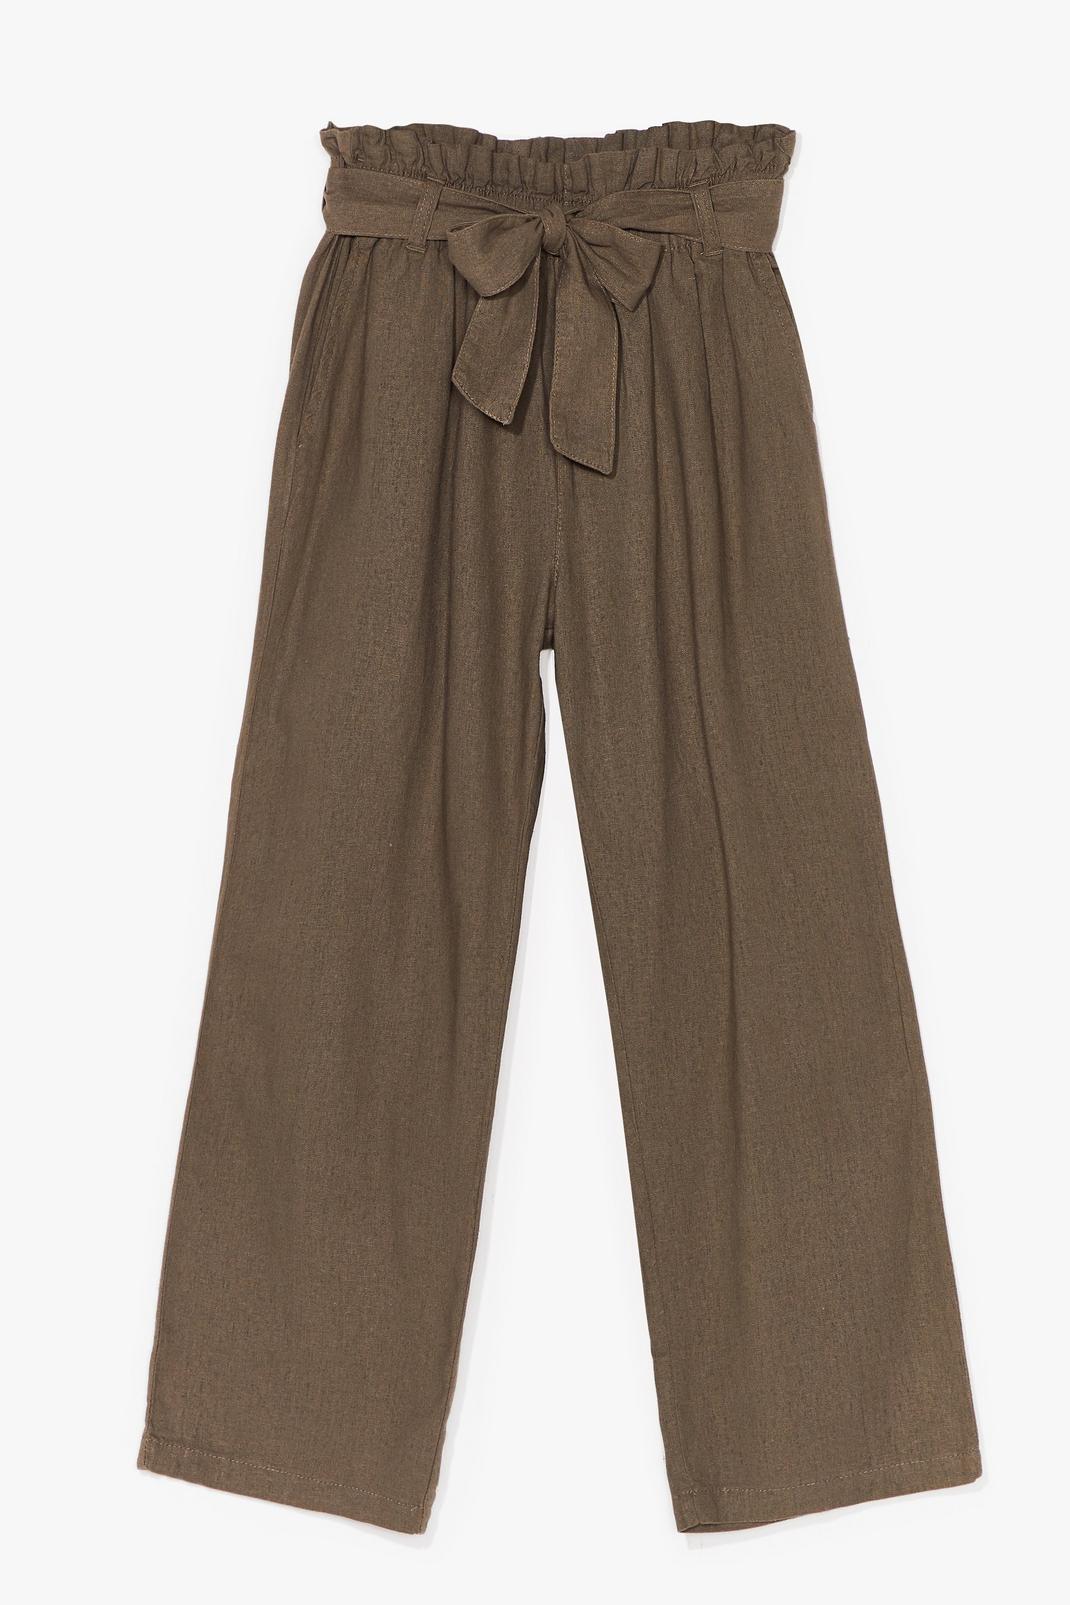 Tie Your Side Paperbag Cropped Pants image number 1